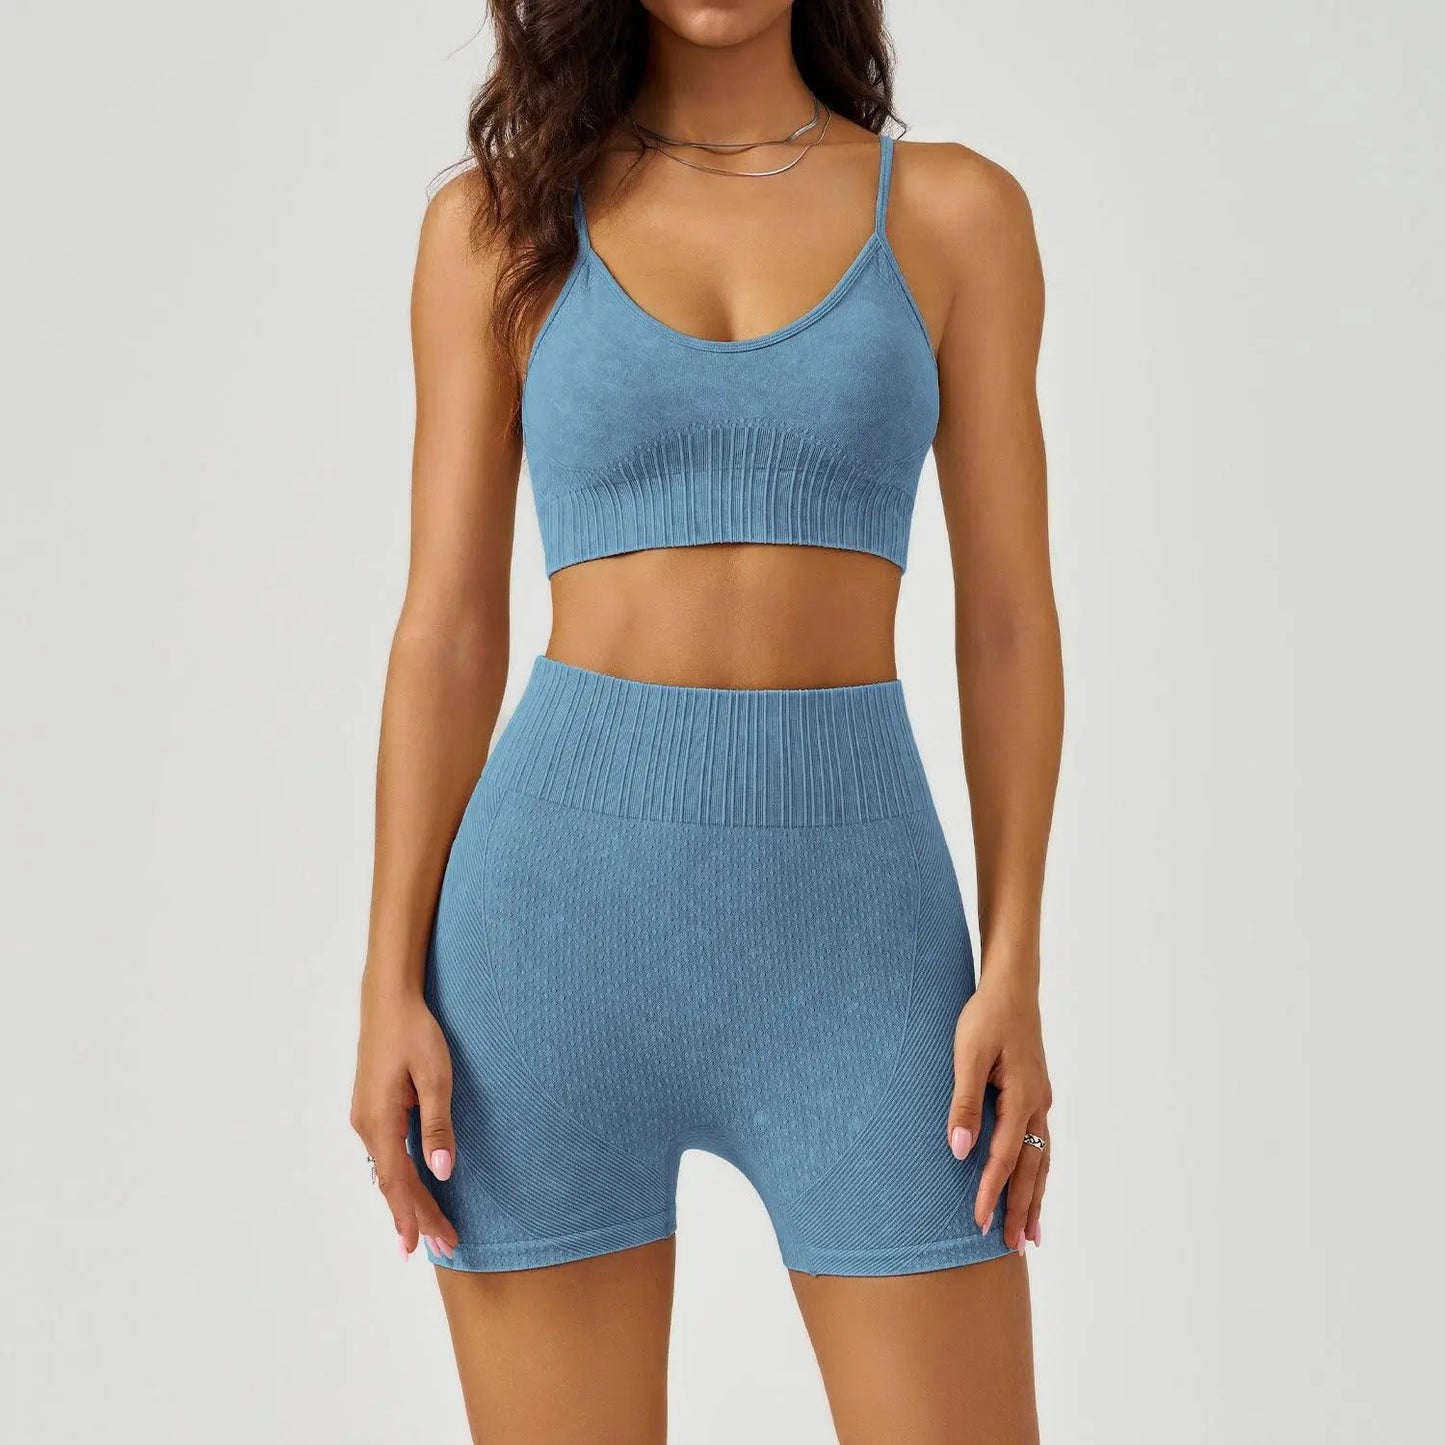 Frosted Exercise Yoga Clothes Suit - Venus Trendy Fashion Online